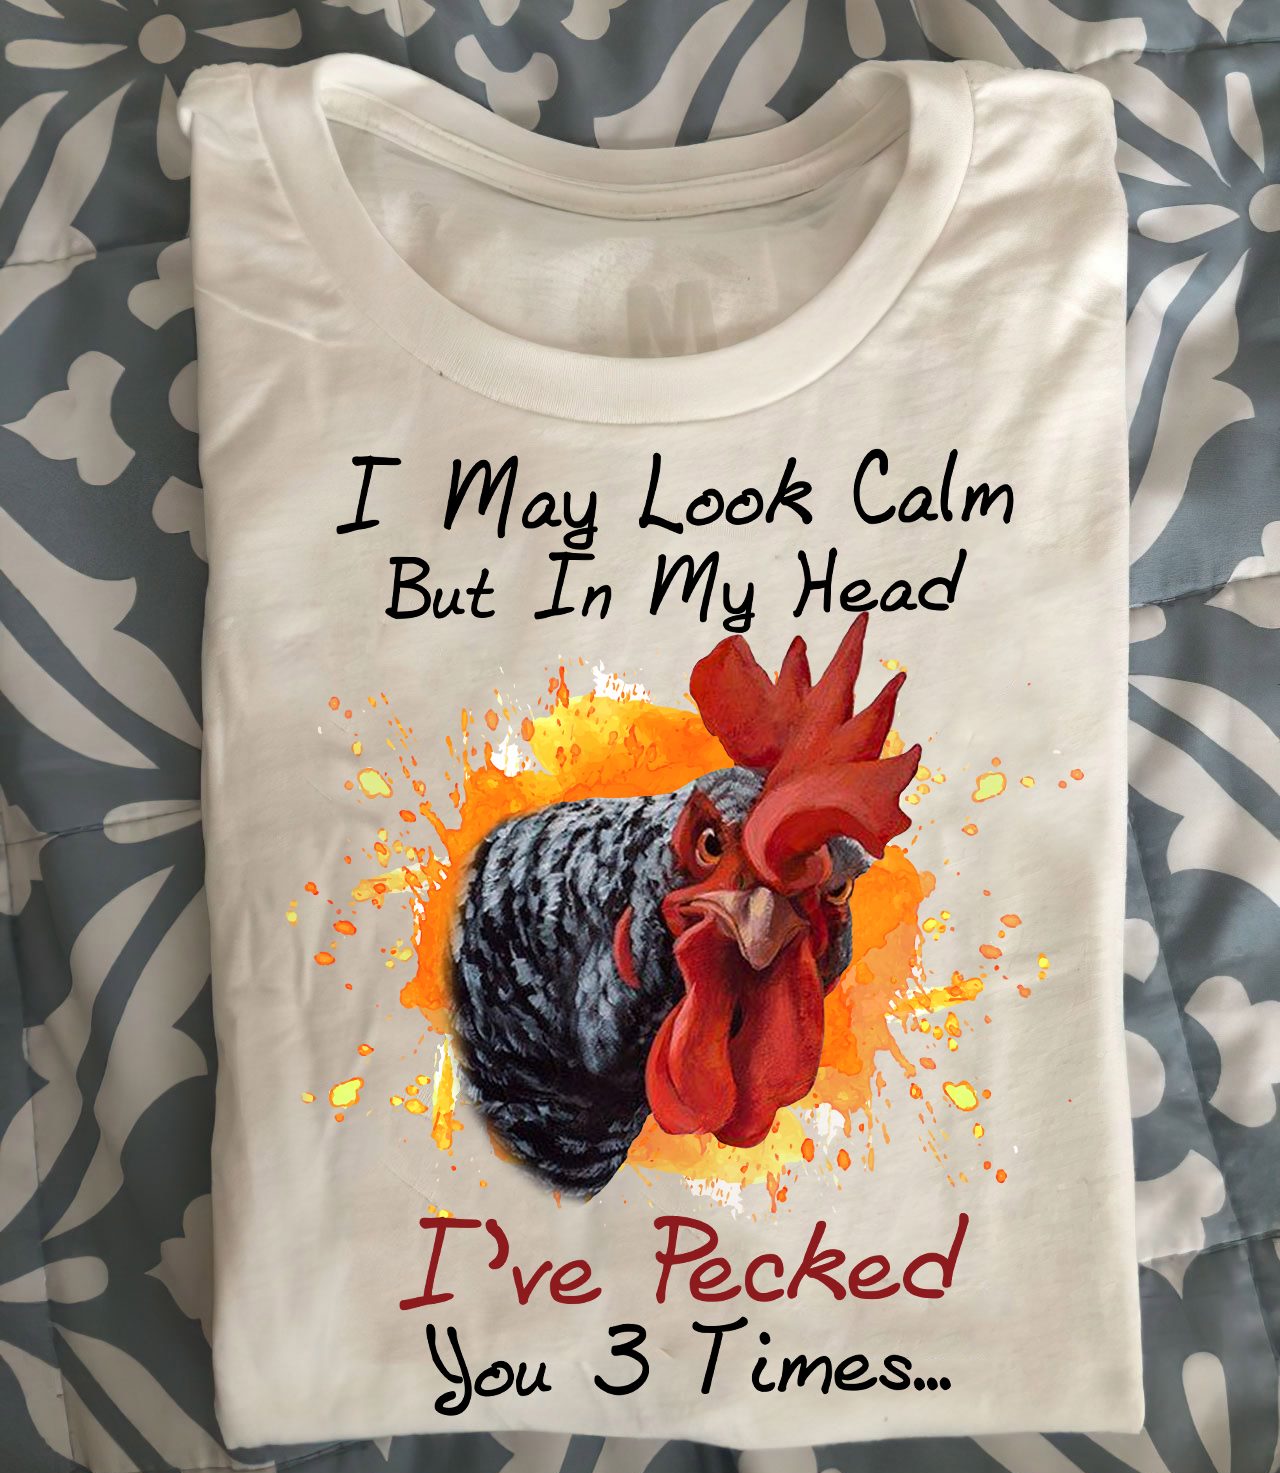 I may look calm but in my head I've pecked you 3 times - Grumpy chicken